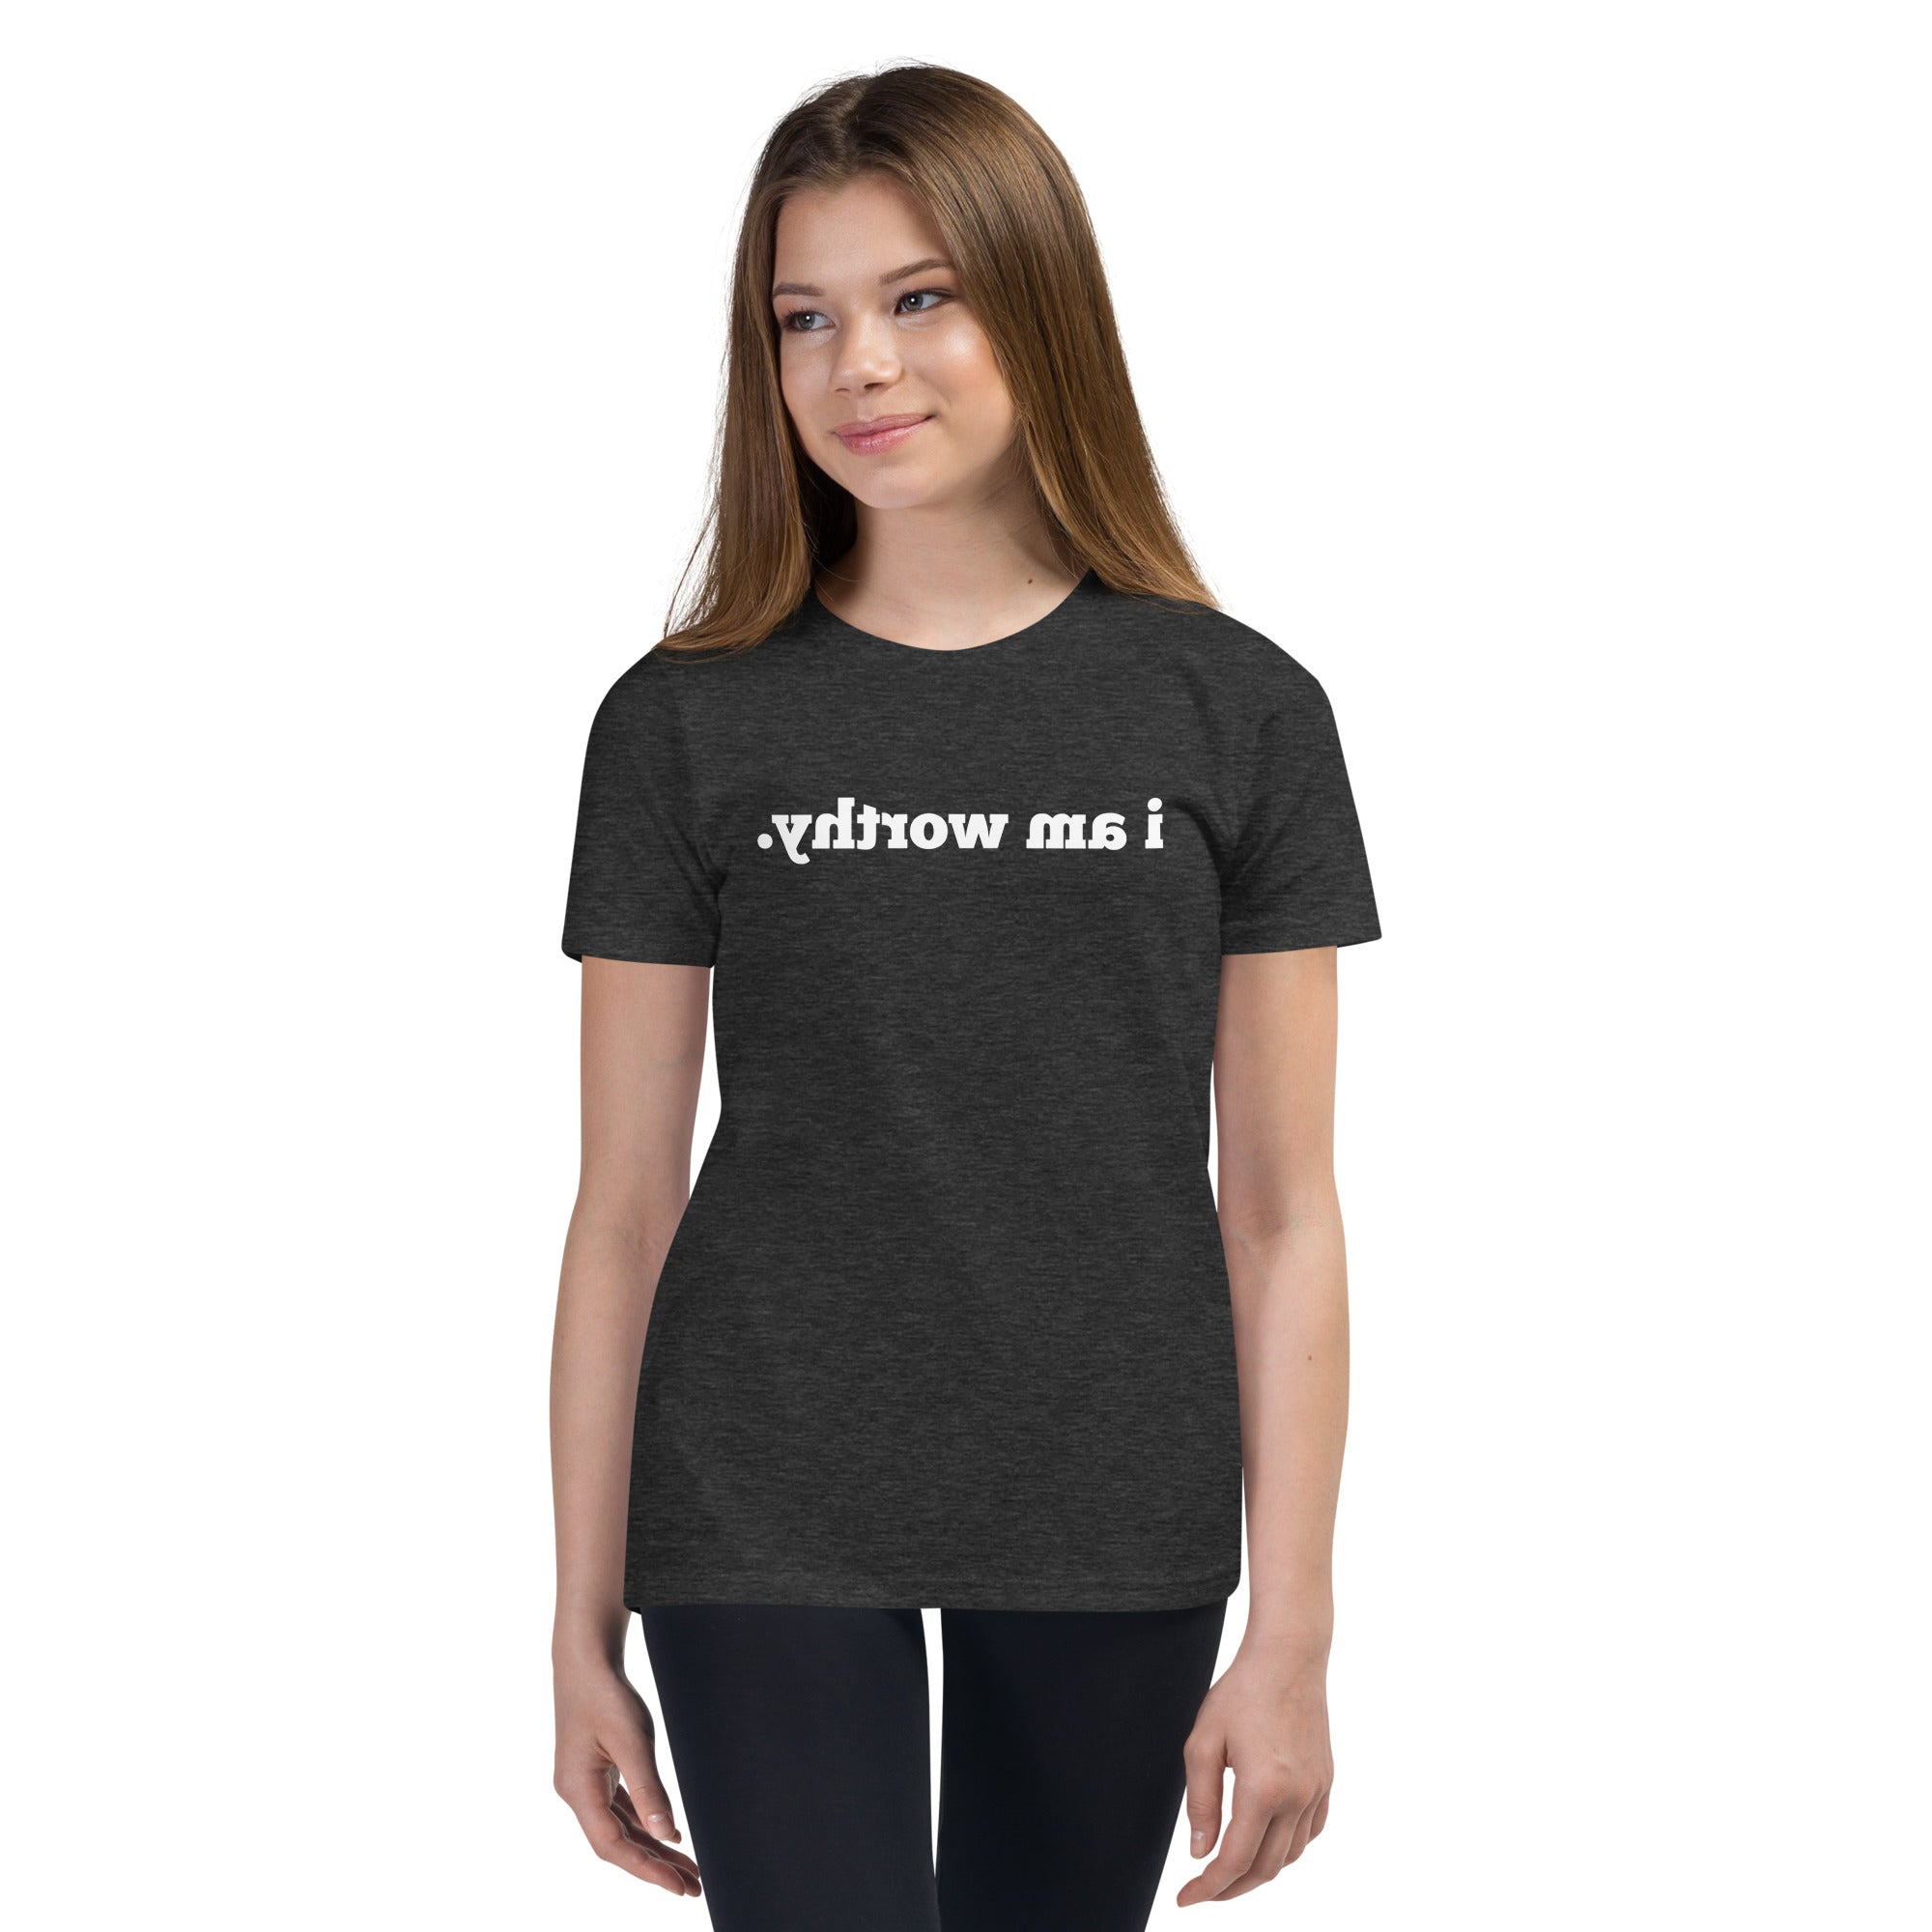 I AM WORTHY Mirror Affirmation Tee (Youth, Short-Sleeve) - 10 COLORS!